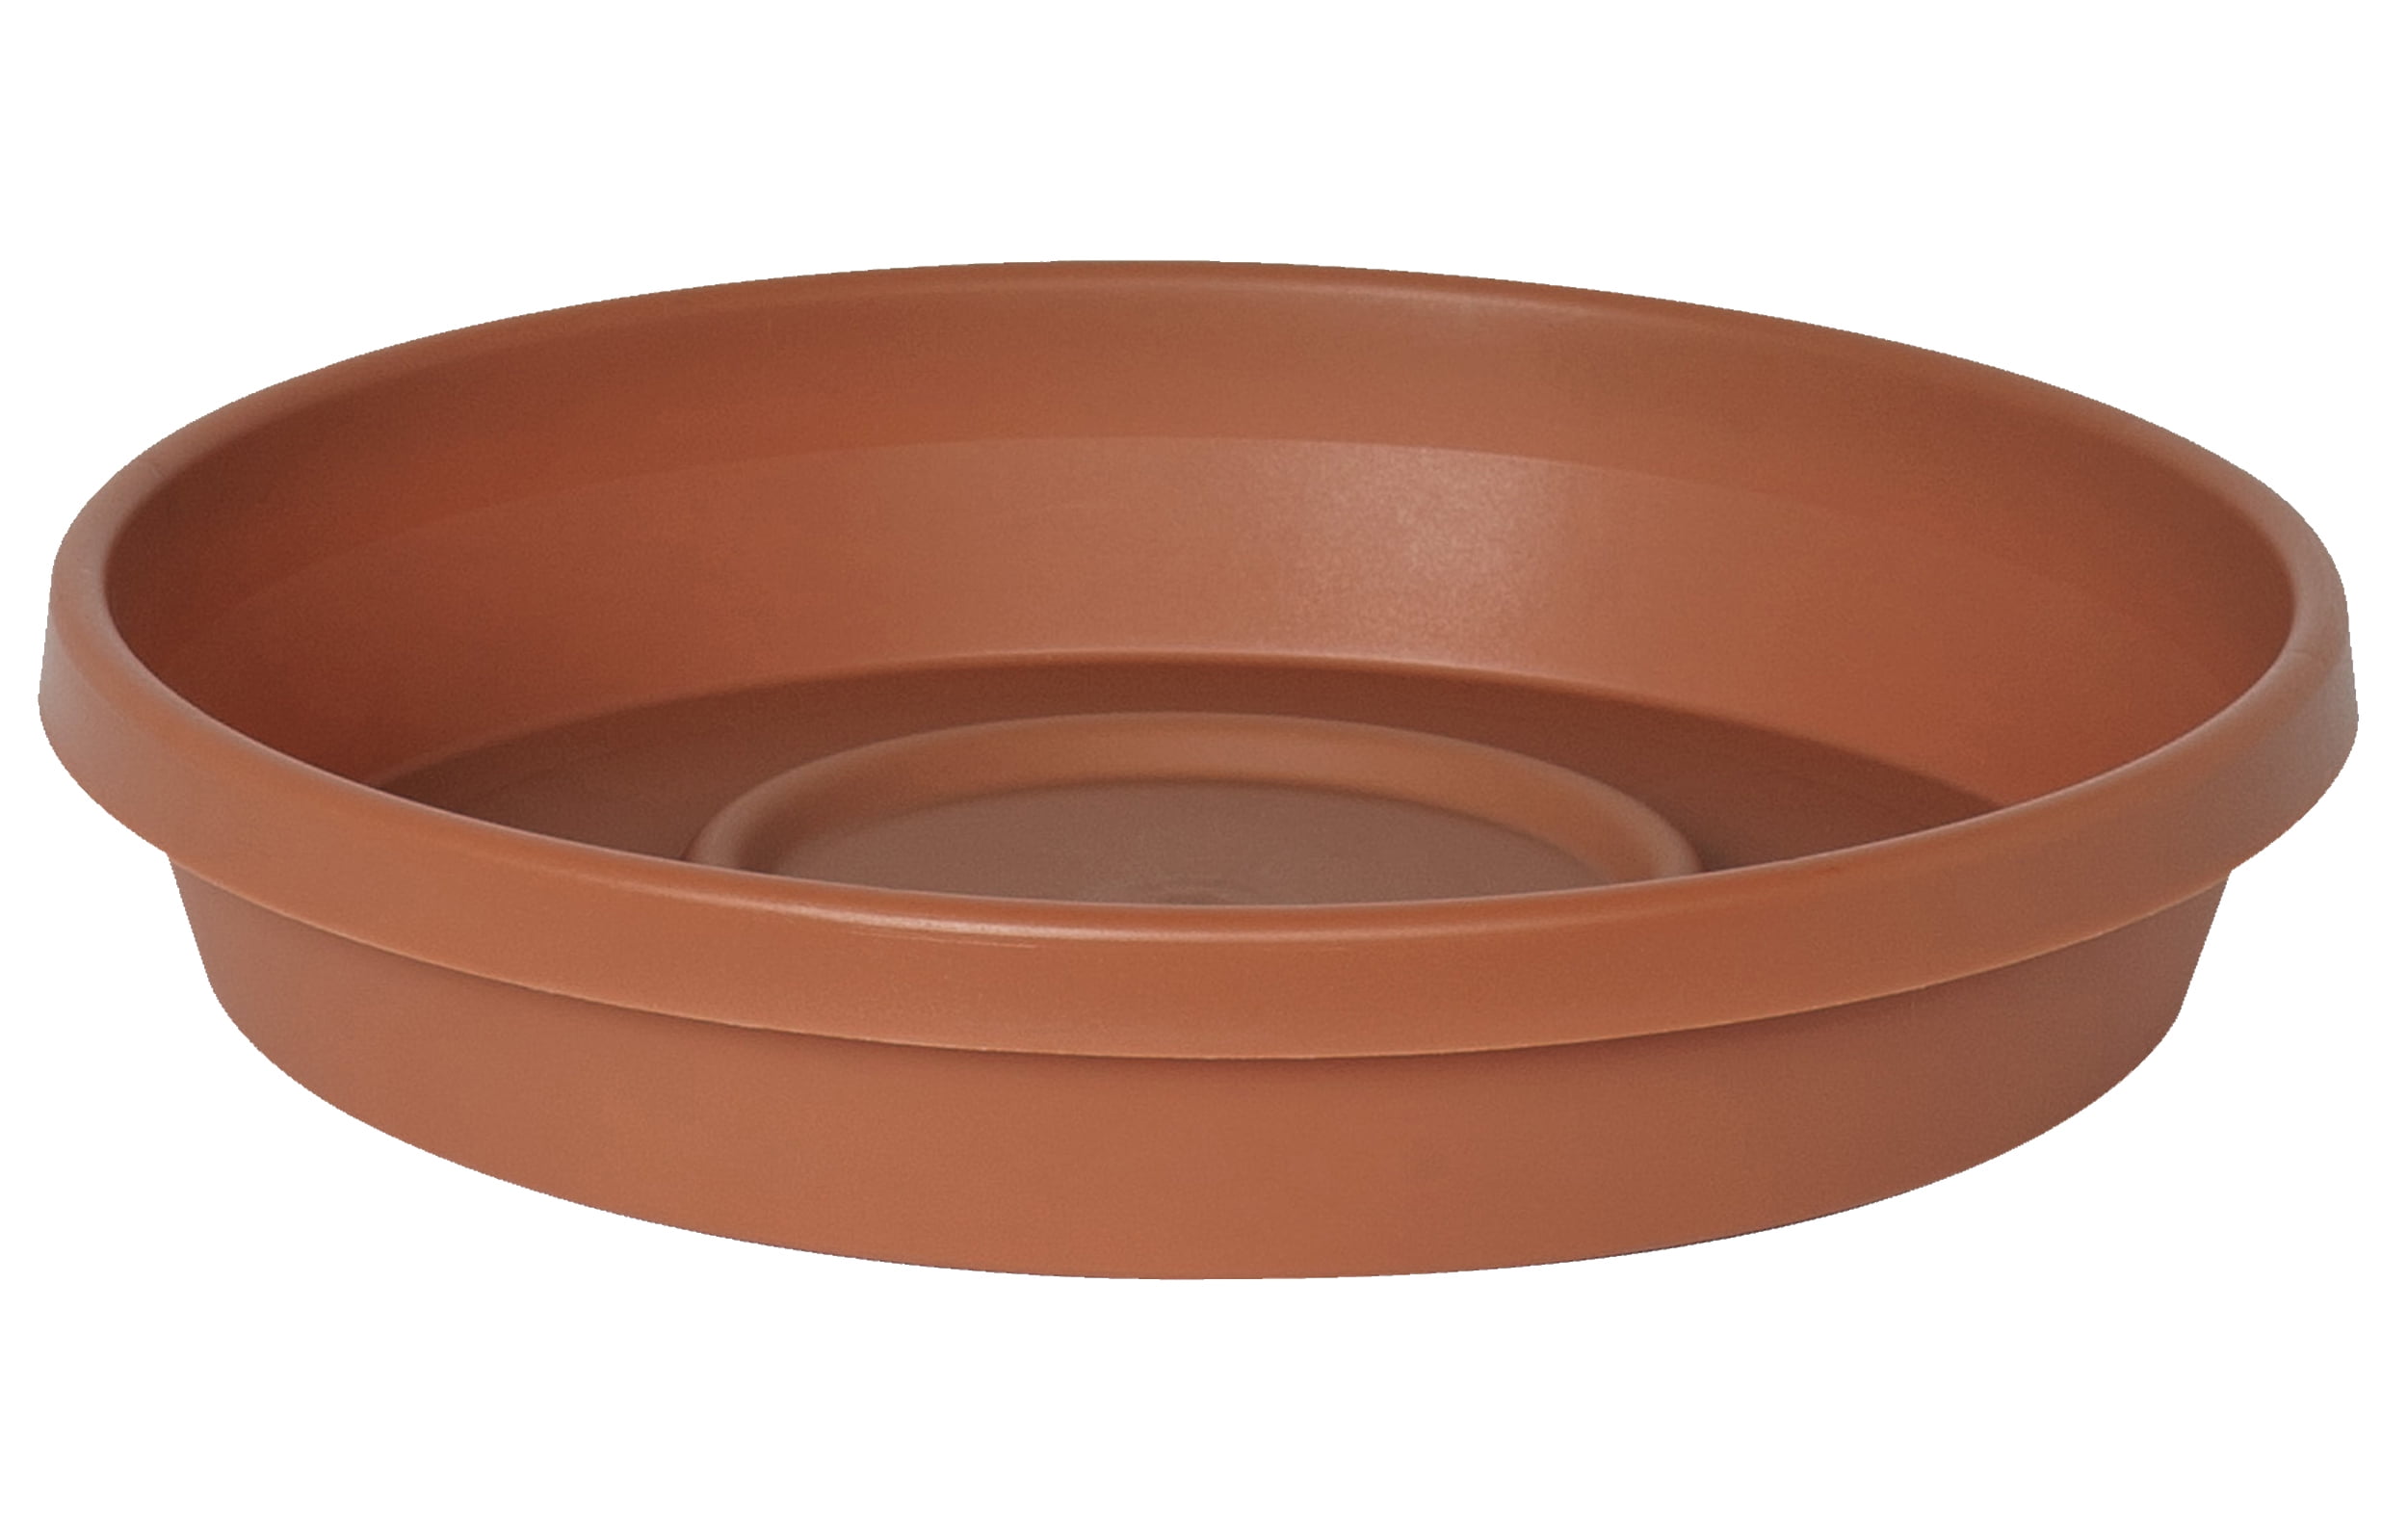 15 x 23cm Plant Pot Saucer Drip Tray Terracotta Plastic Deep High Sided Strong 